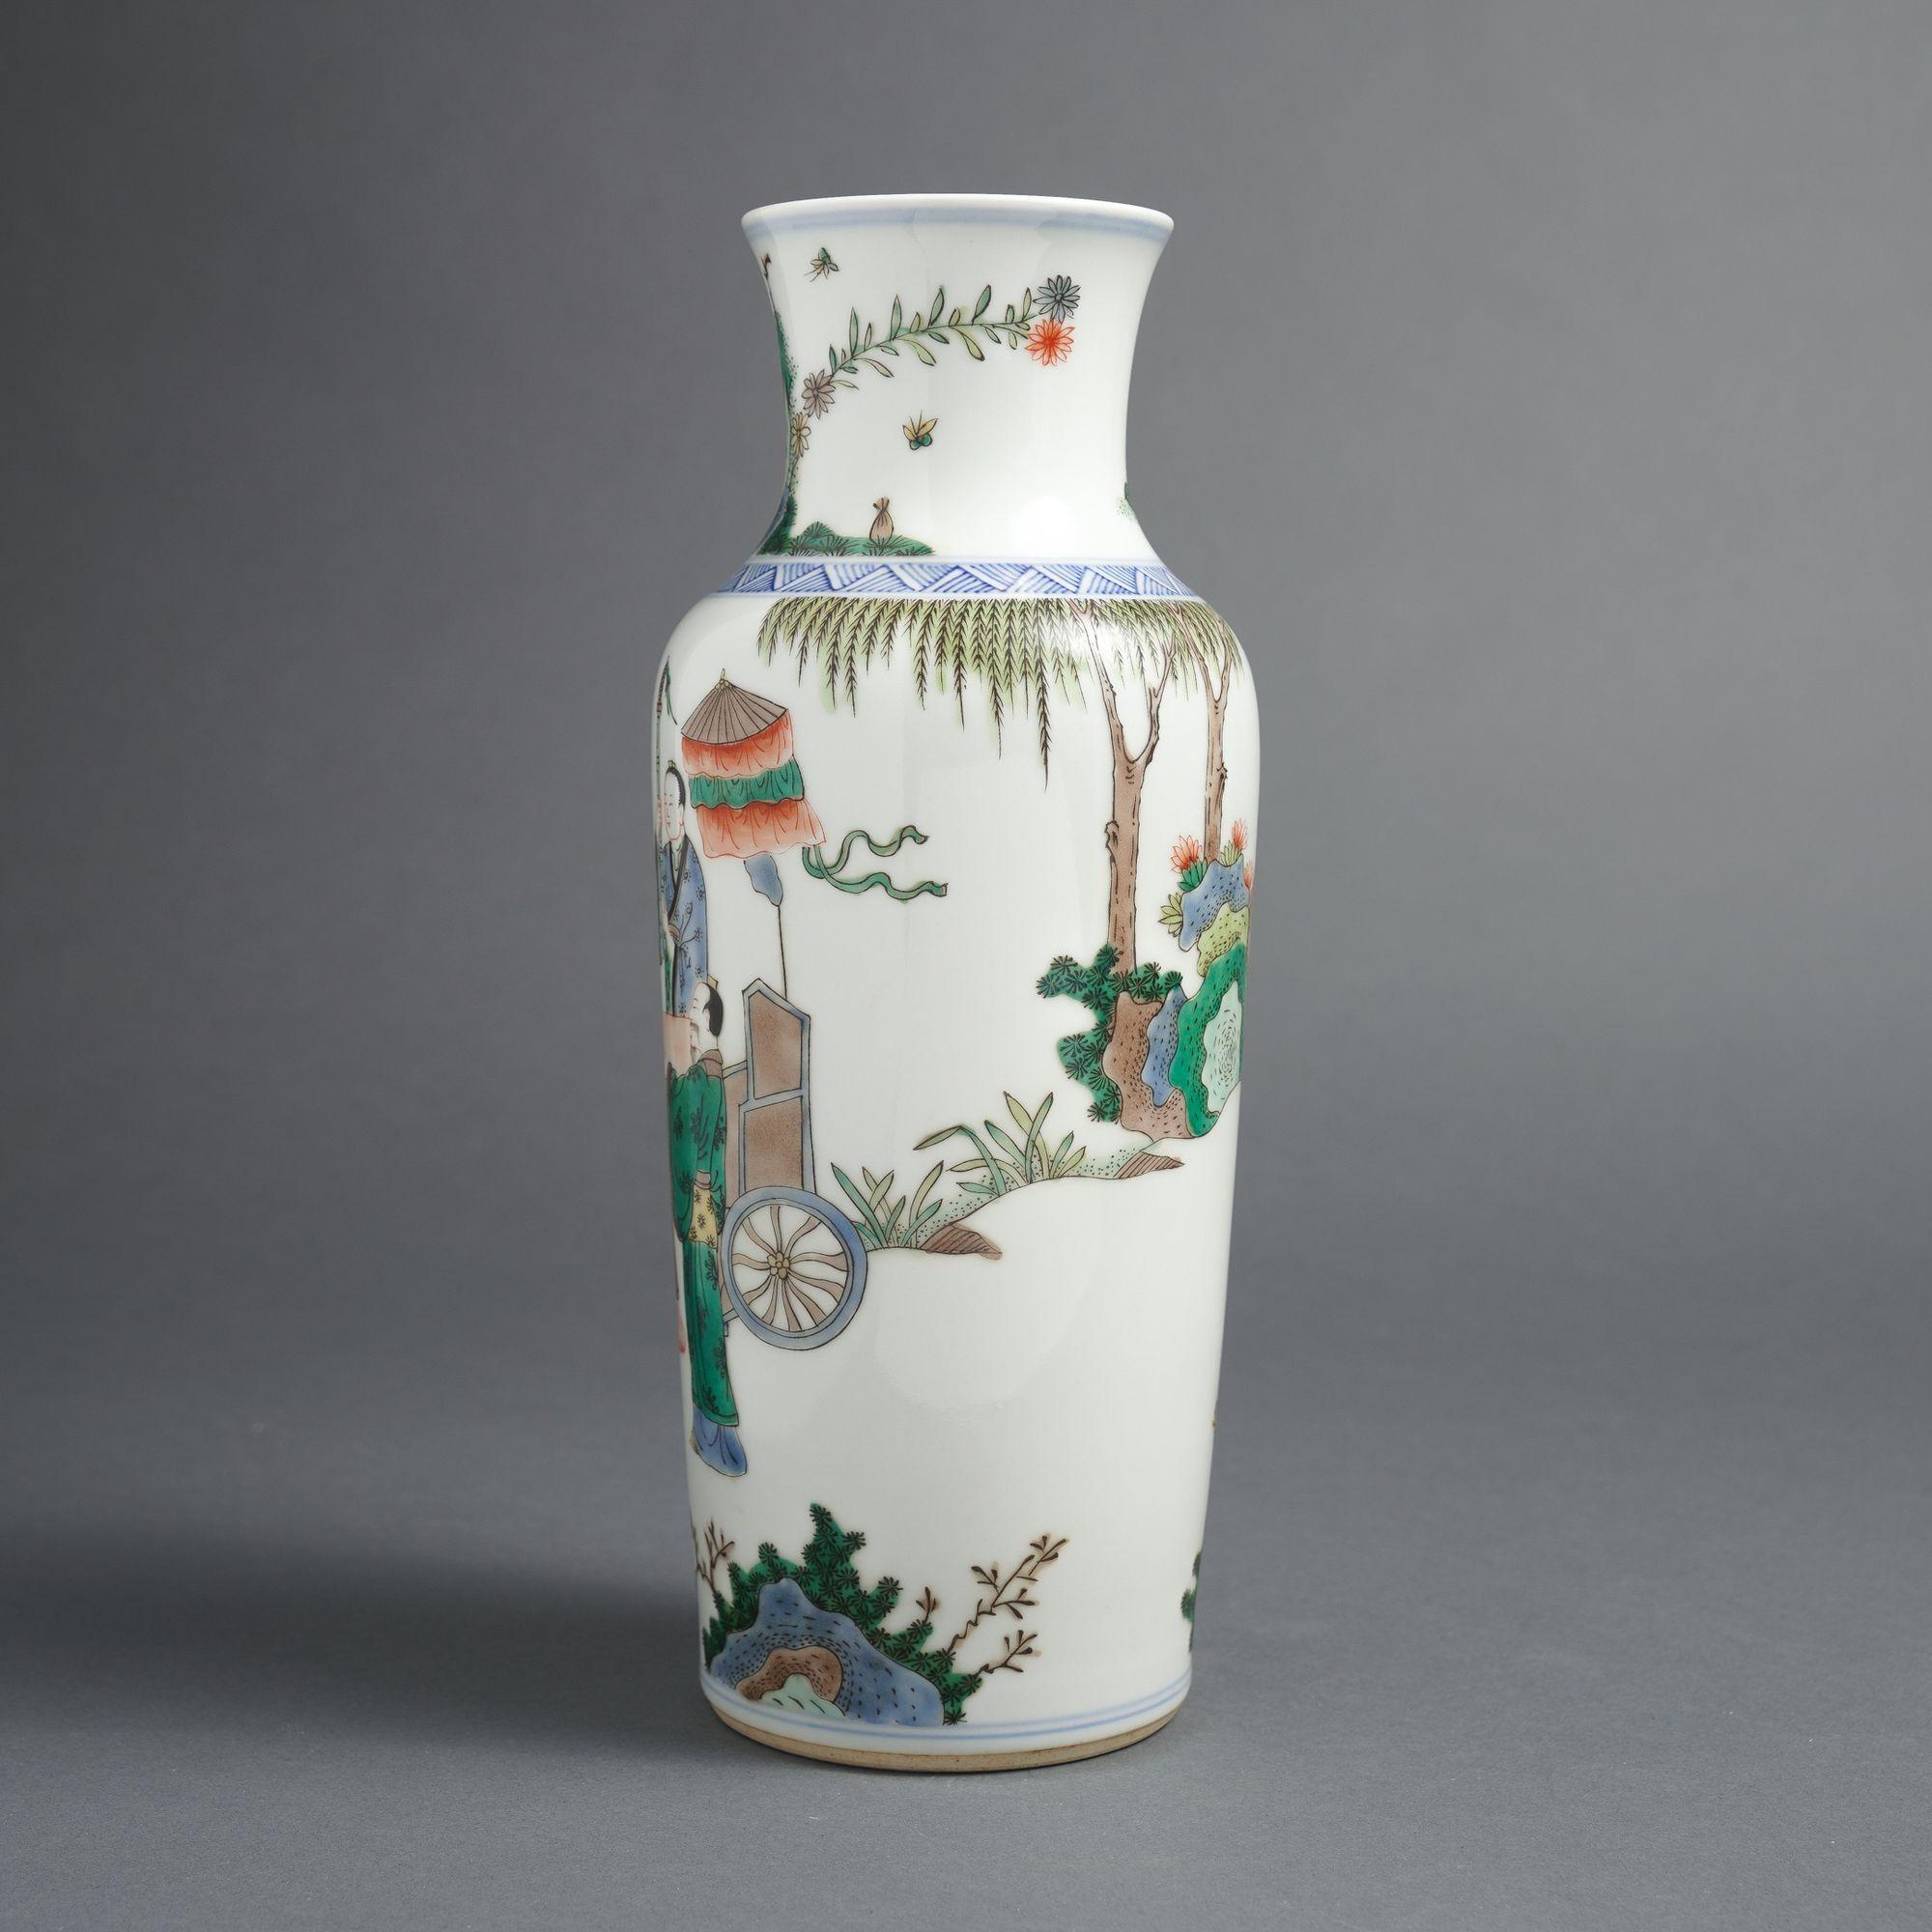 Chinese Famille Verte porcelain sleeve form rouleau vase with six figure mark encircled in double rings in cobalt underglaze blue on the underfoot. The vase is decorated in a continuous scene of figures in a garden landscape, dressed in garments